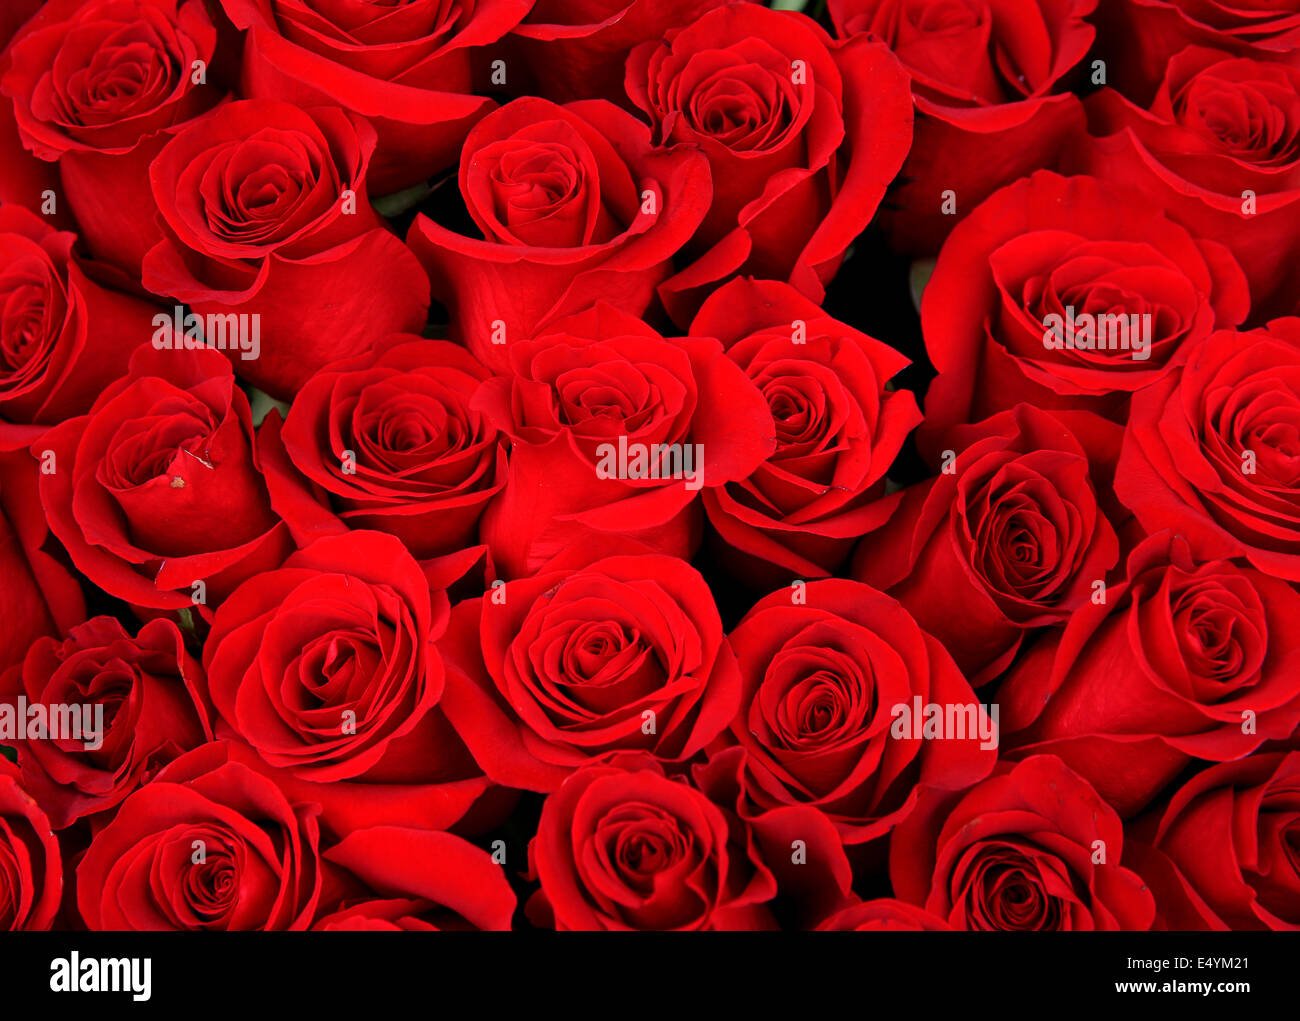 beautiful bouquet of red roses Stock Photo